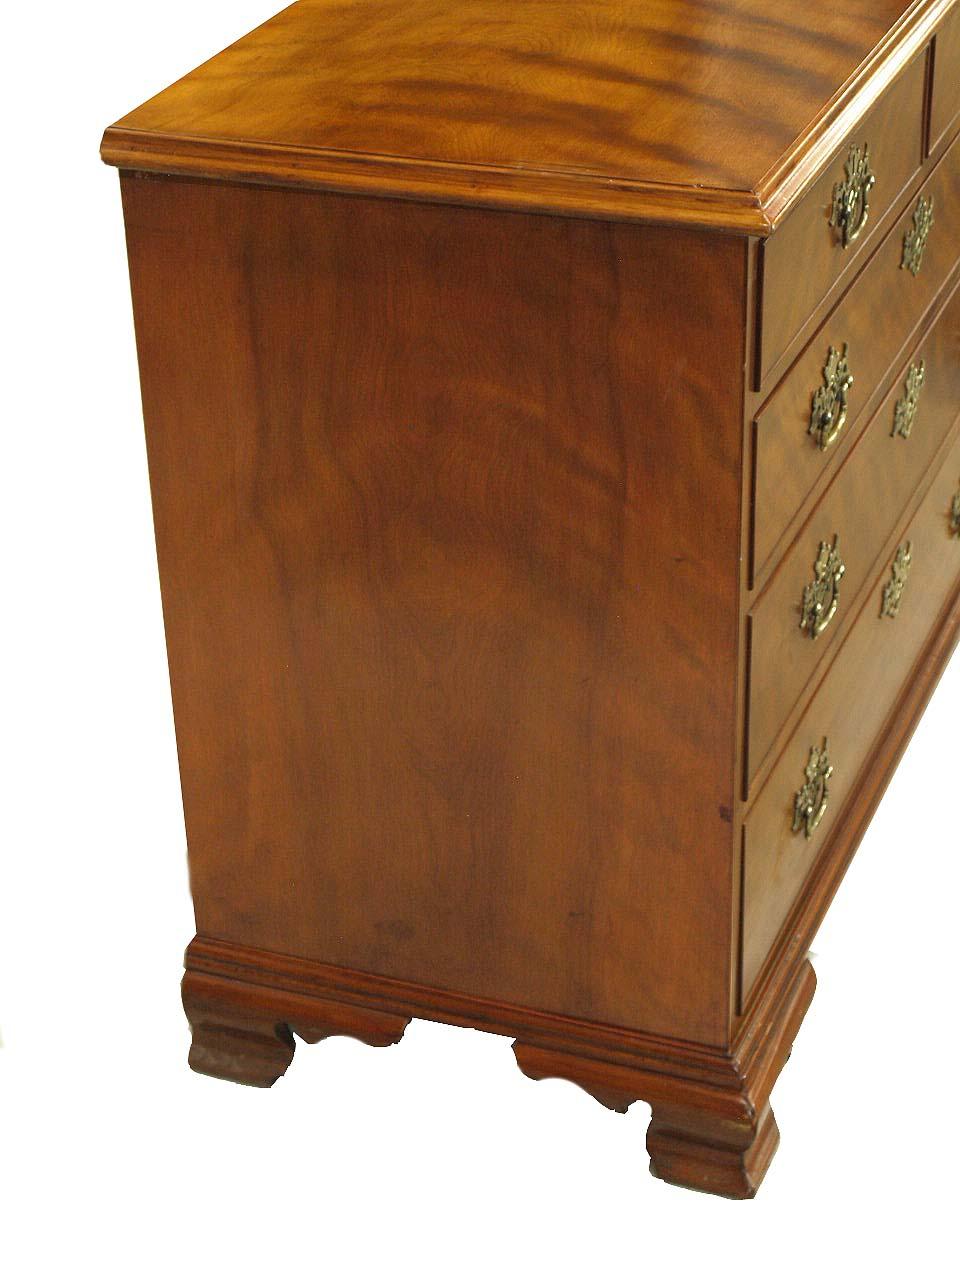 English birch two over three drawer chest,  besides the useful scale of this chest, the most notable feature is the beautiful figuring of the birch grain on the drawers and top.  The graduated drawers have reticulated brass pulls and escutcheons,